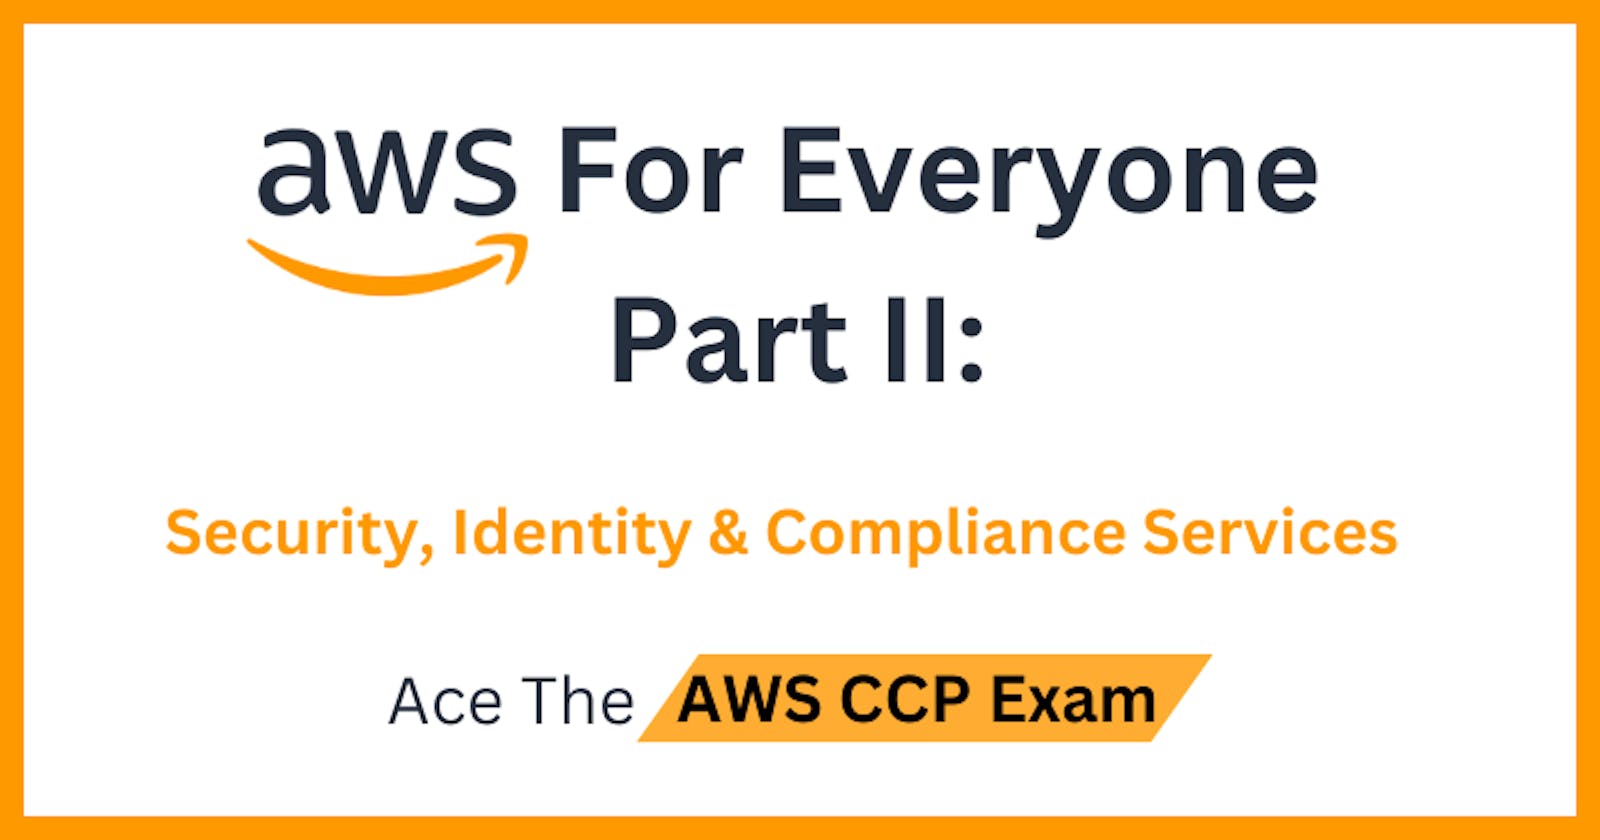 AWS For Everyone - Part II: Security, Identity & Compliance Services